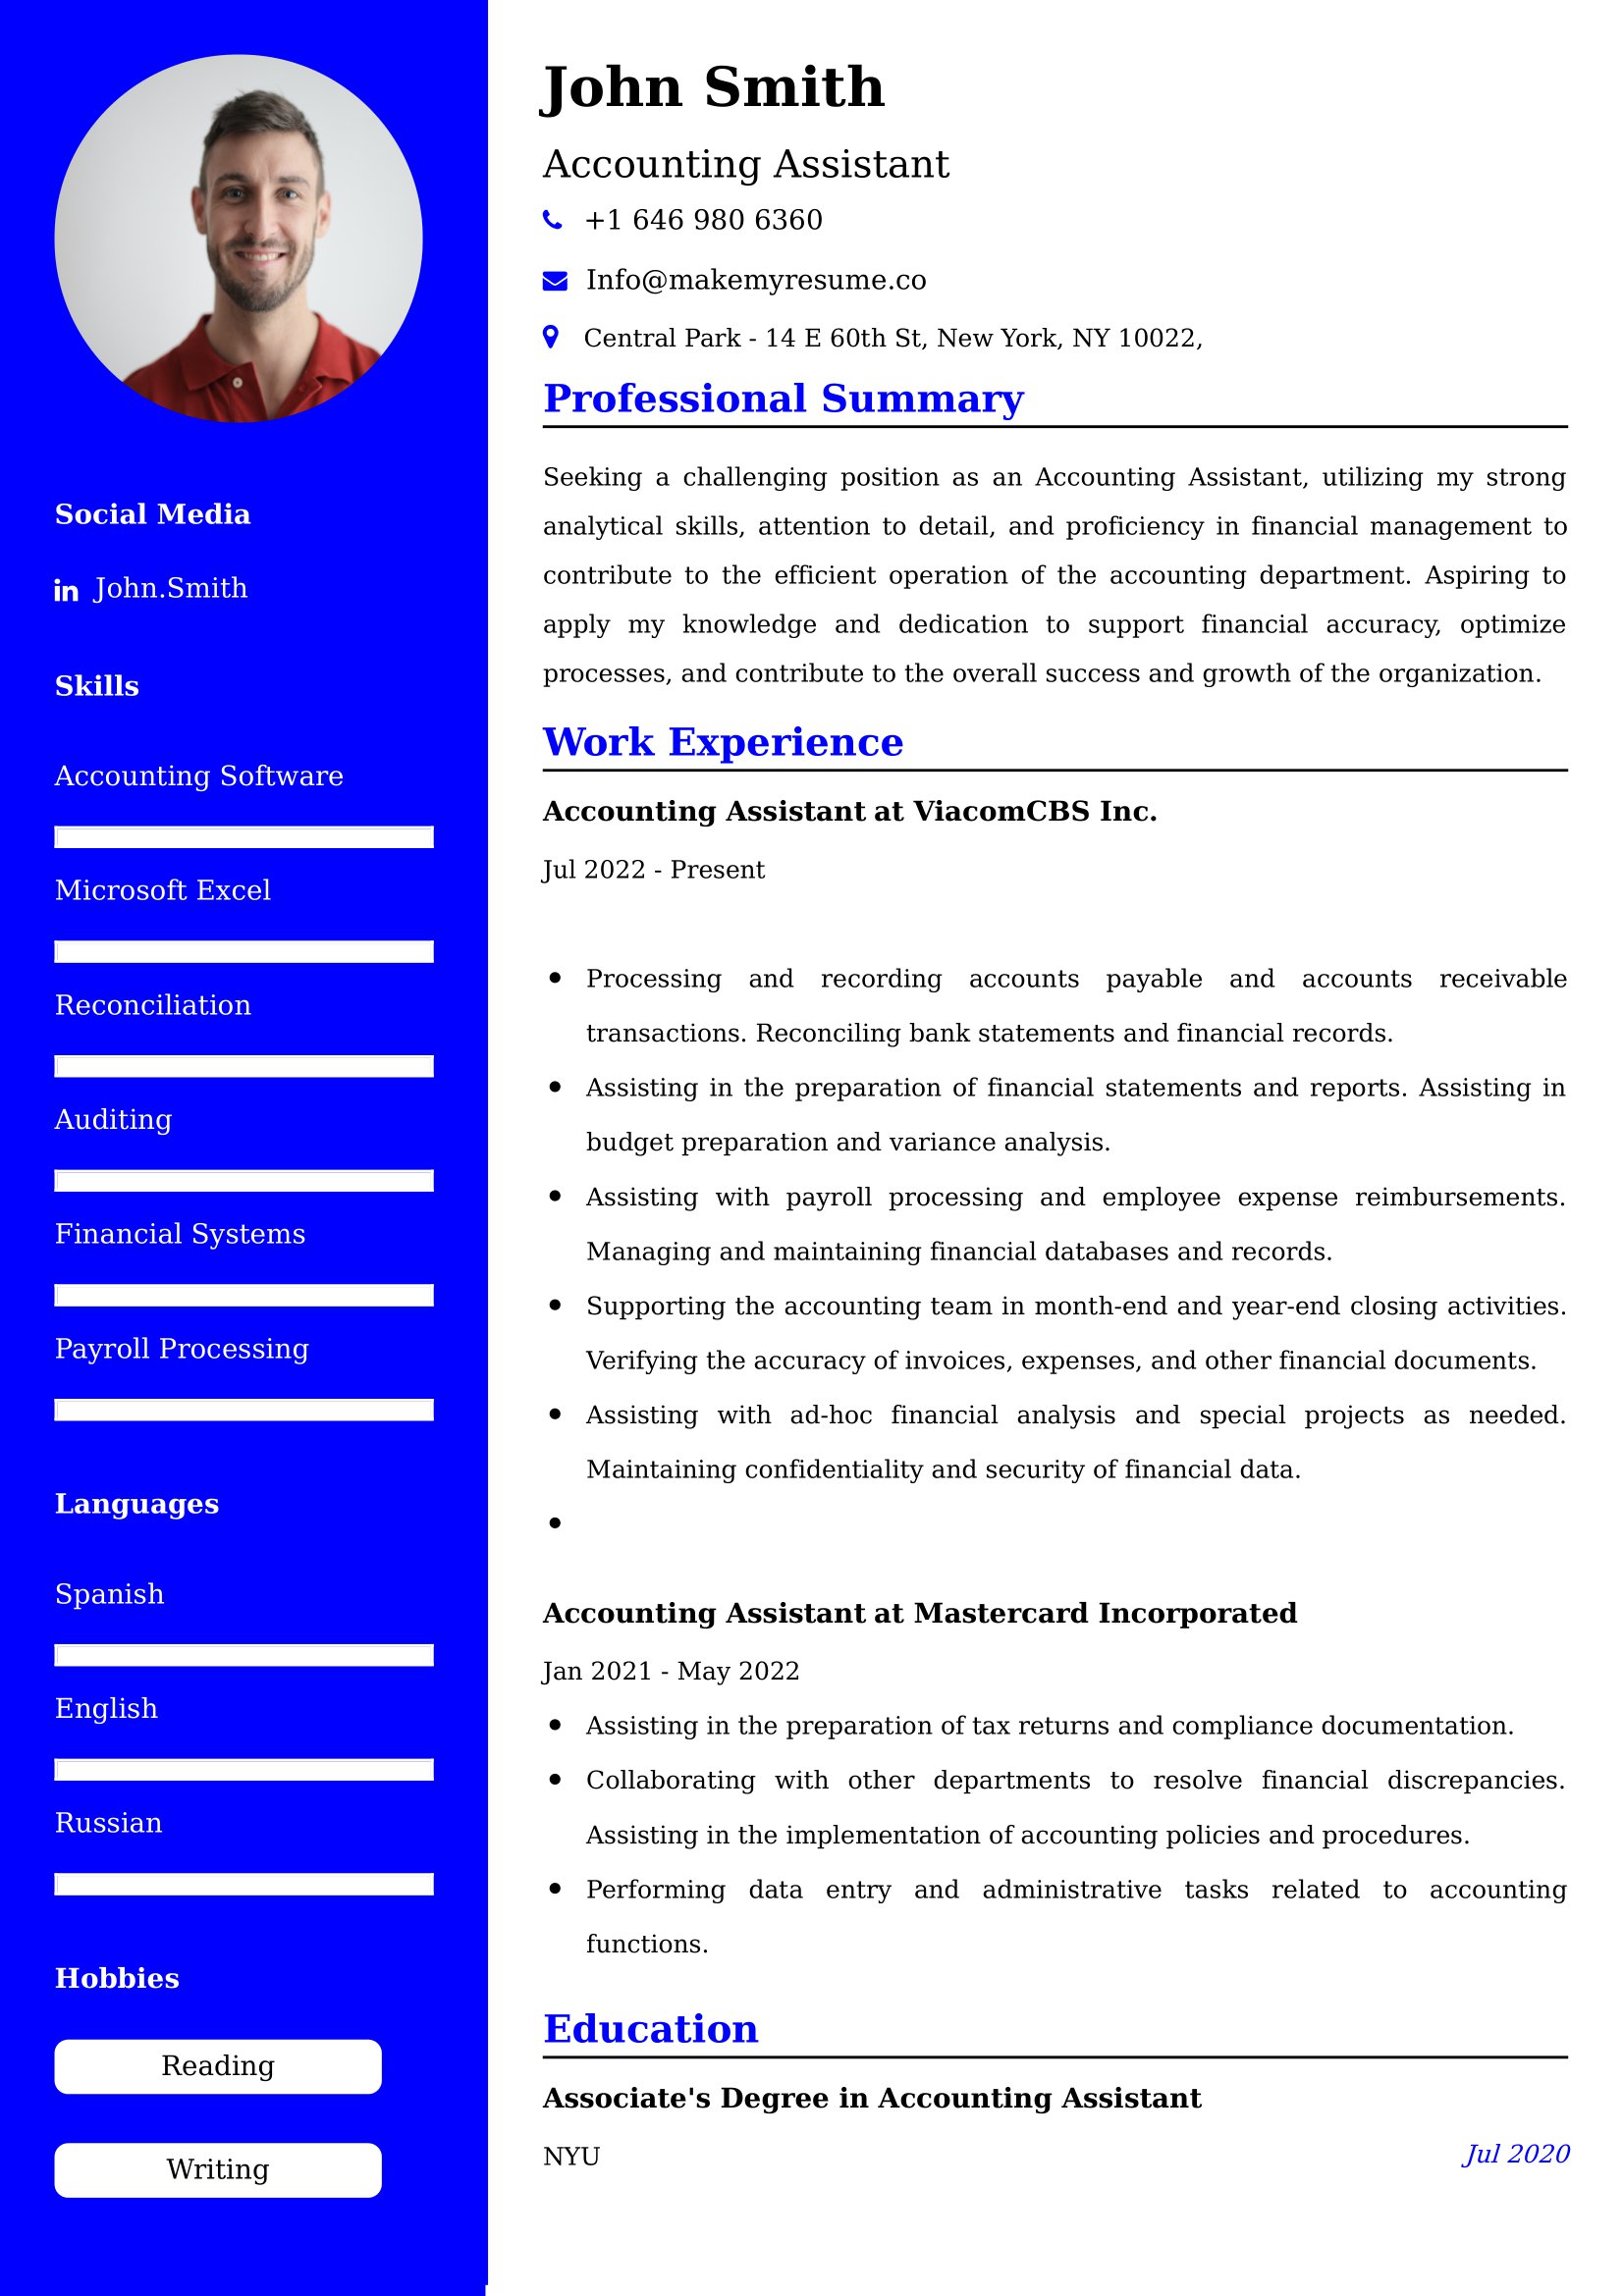 Accounting Assistant CV Examples Malaysia